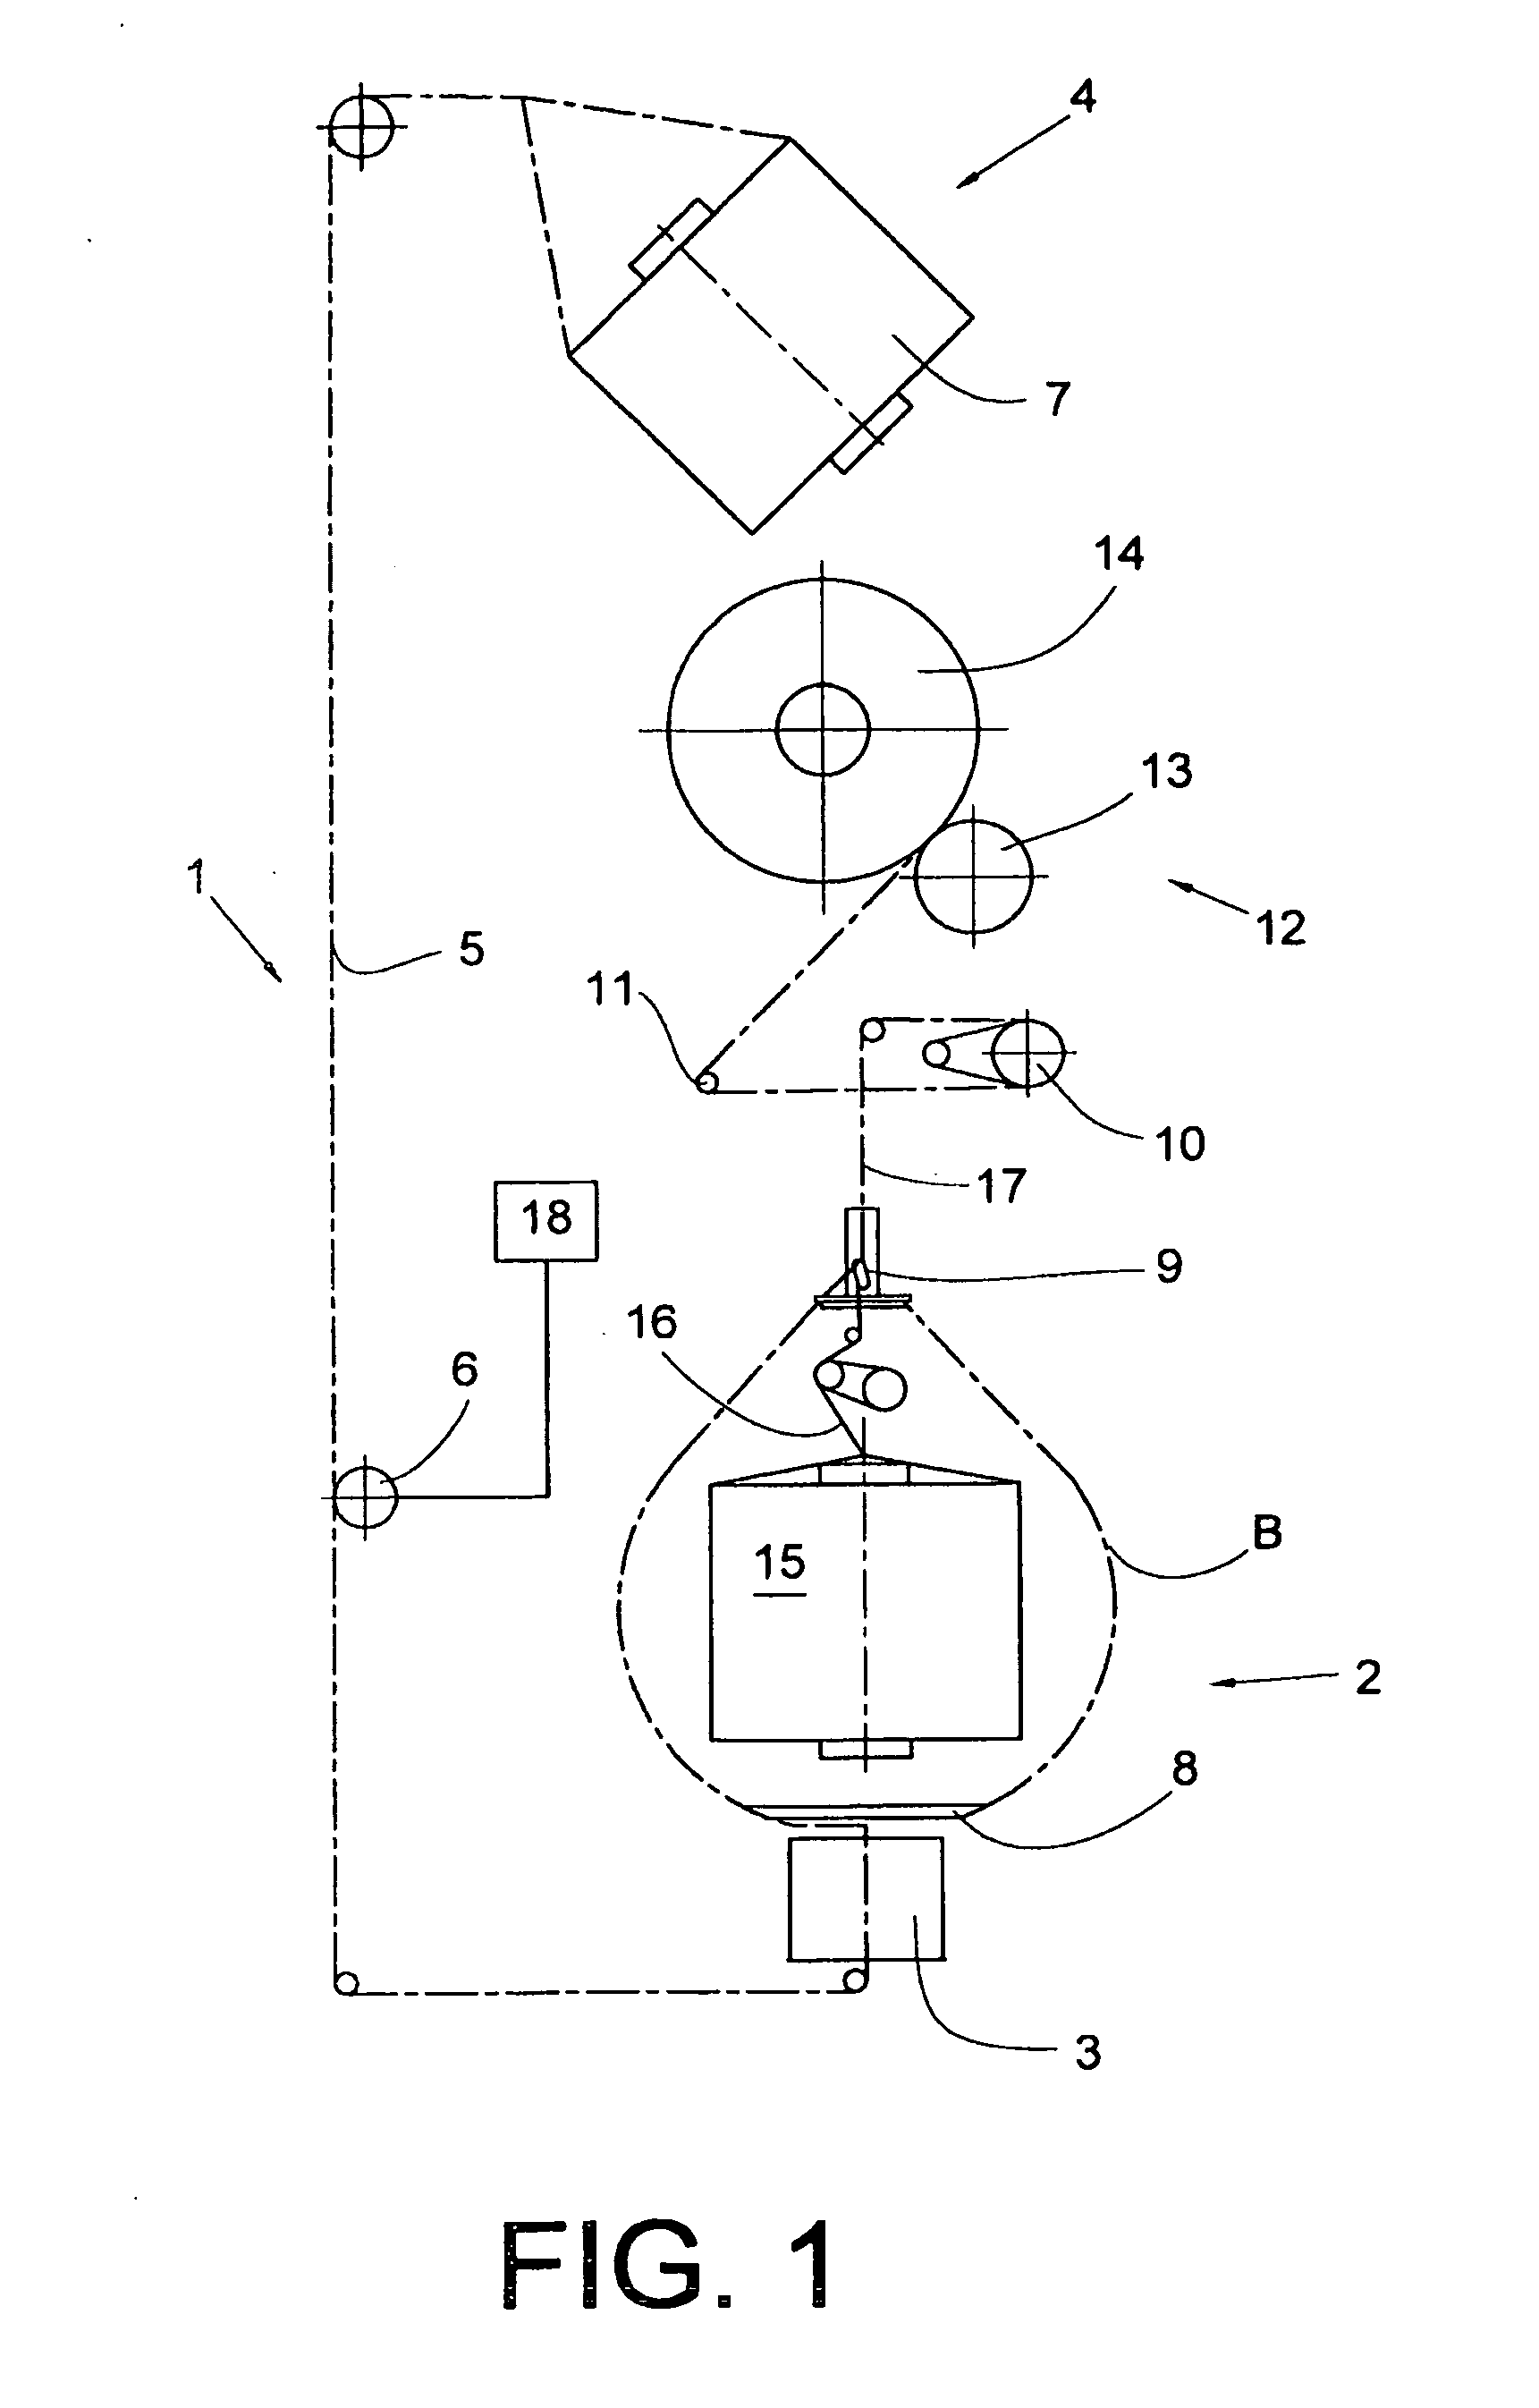 Method for operating a spindle of a two-for-one twister or cabling machine